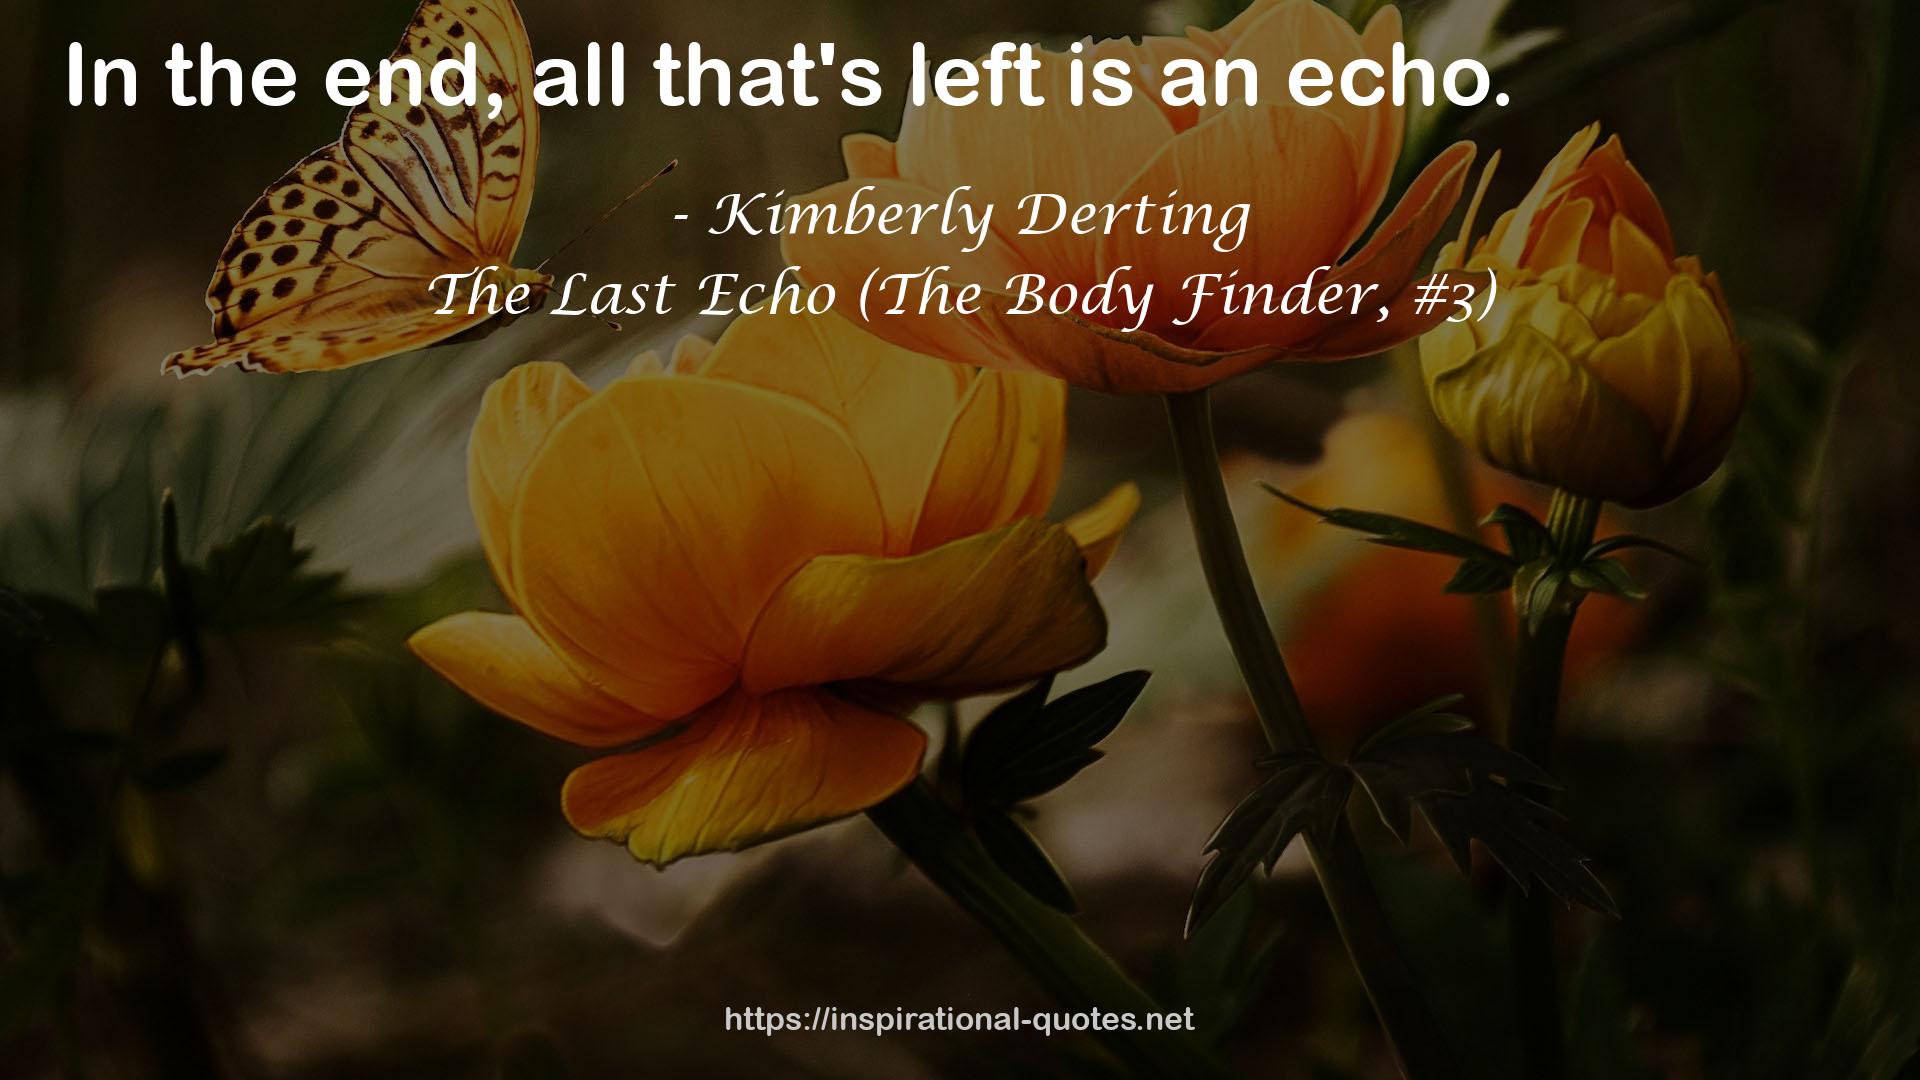 The Last Echo (The Body Finder, #3) QUOTES